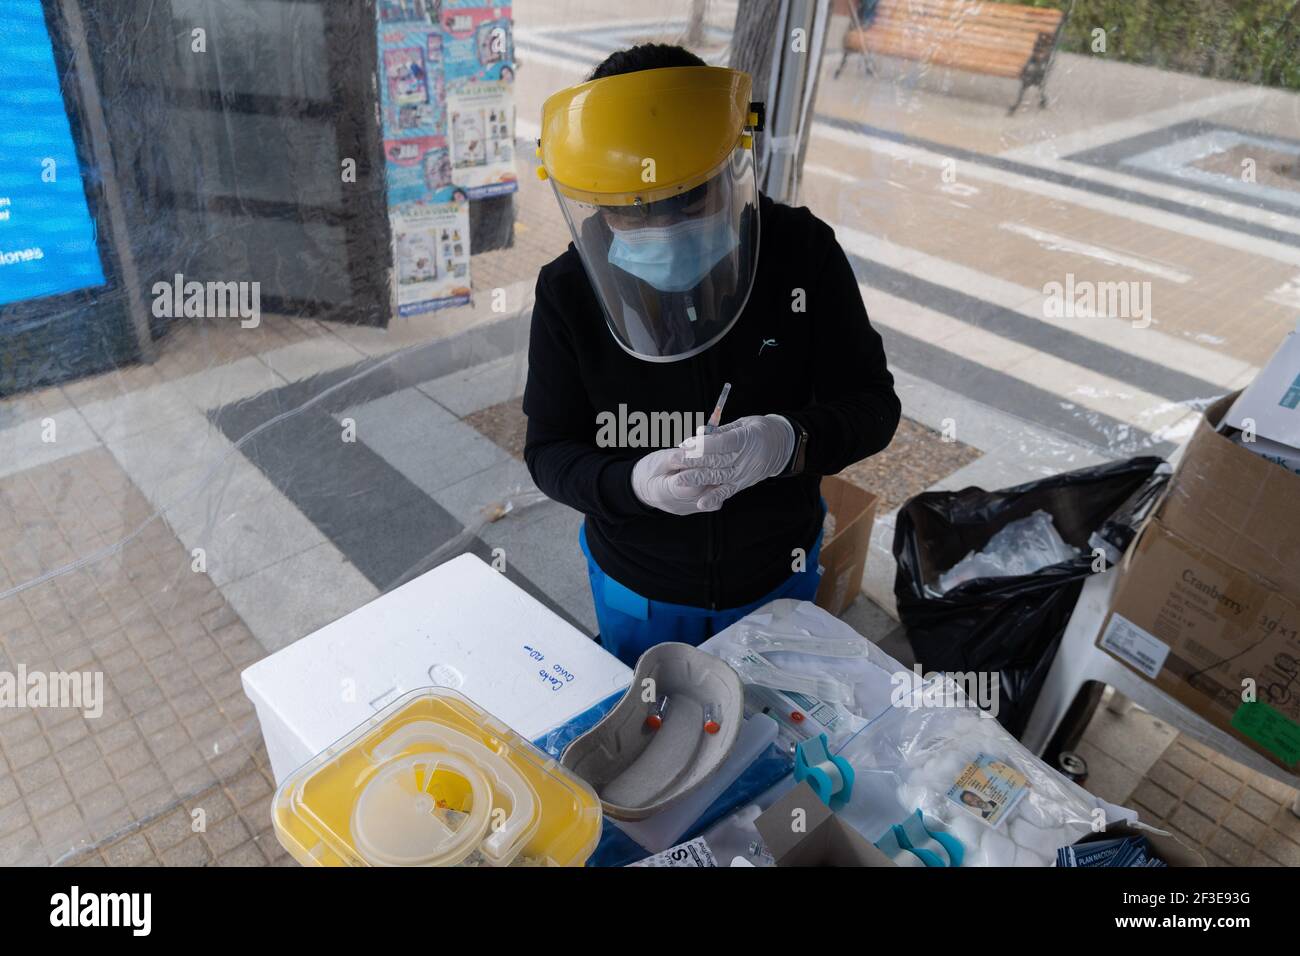 Santiago, Metropolitana, Chile. 16th Mar, 2021. A nurse prepares a dose of the Sinovac vaccine for COVID 19 at a drive-thru vaccination site in Santiago, Chile. So far, almost 5 million people have been vaccinated in the country, and 41% of them with the second dose. Credit: Matias Basualdo/ZUMA Wire/Alamy Live News Stock Photo